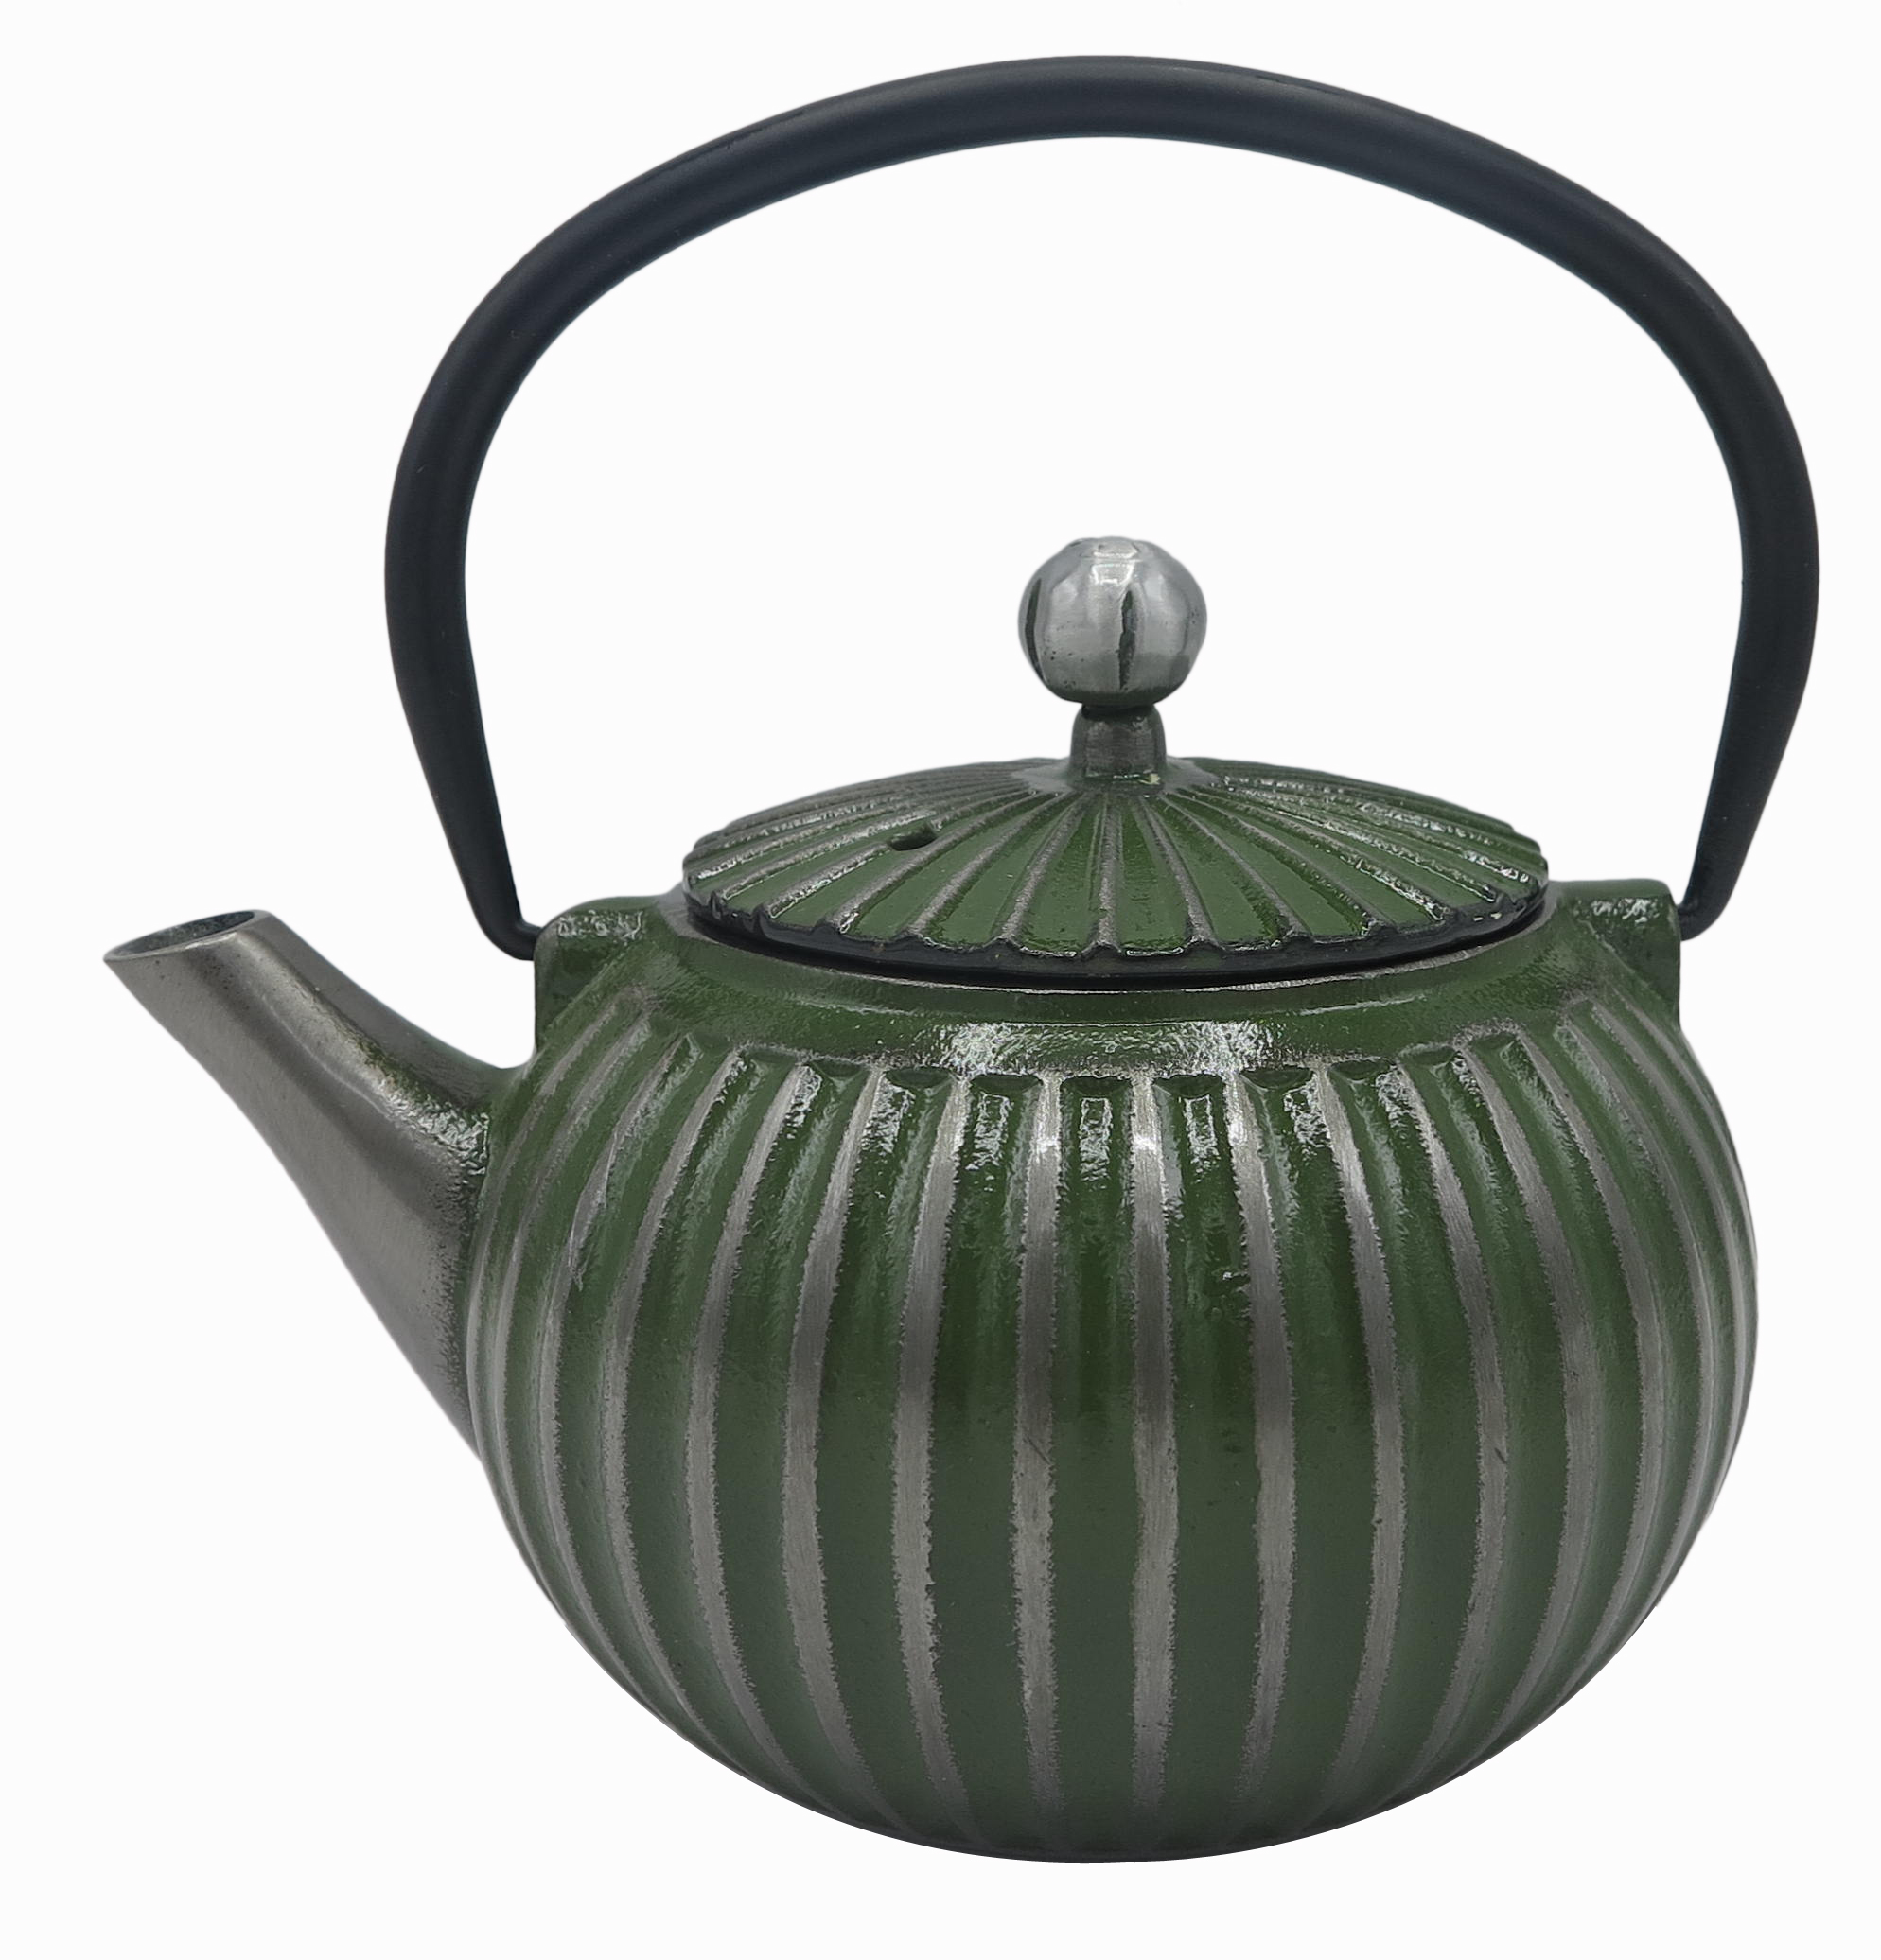 Japanese cast iron teapot kettle with stainless steel infuser